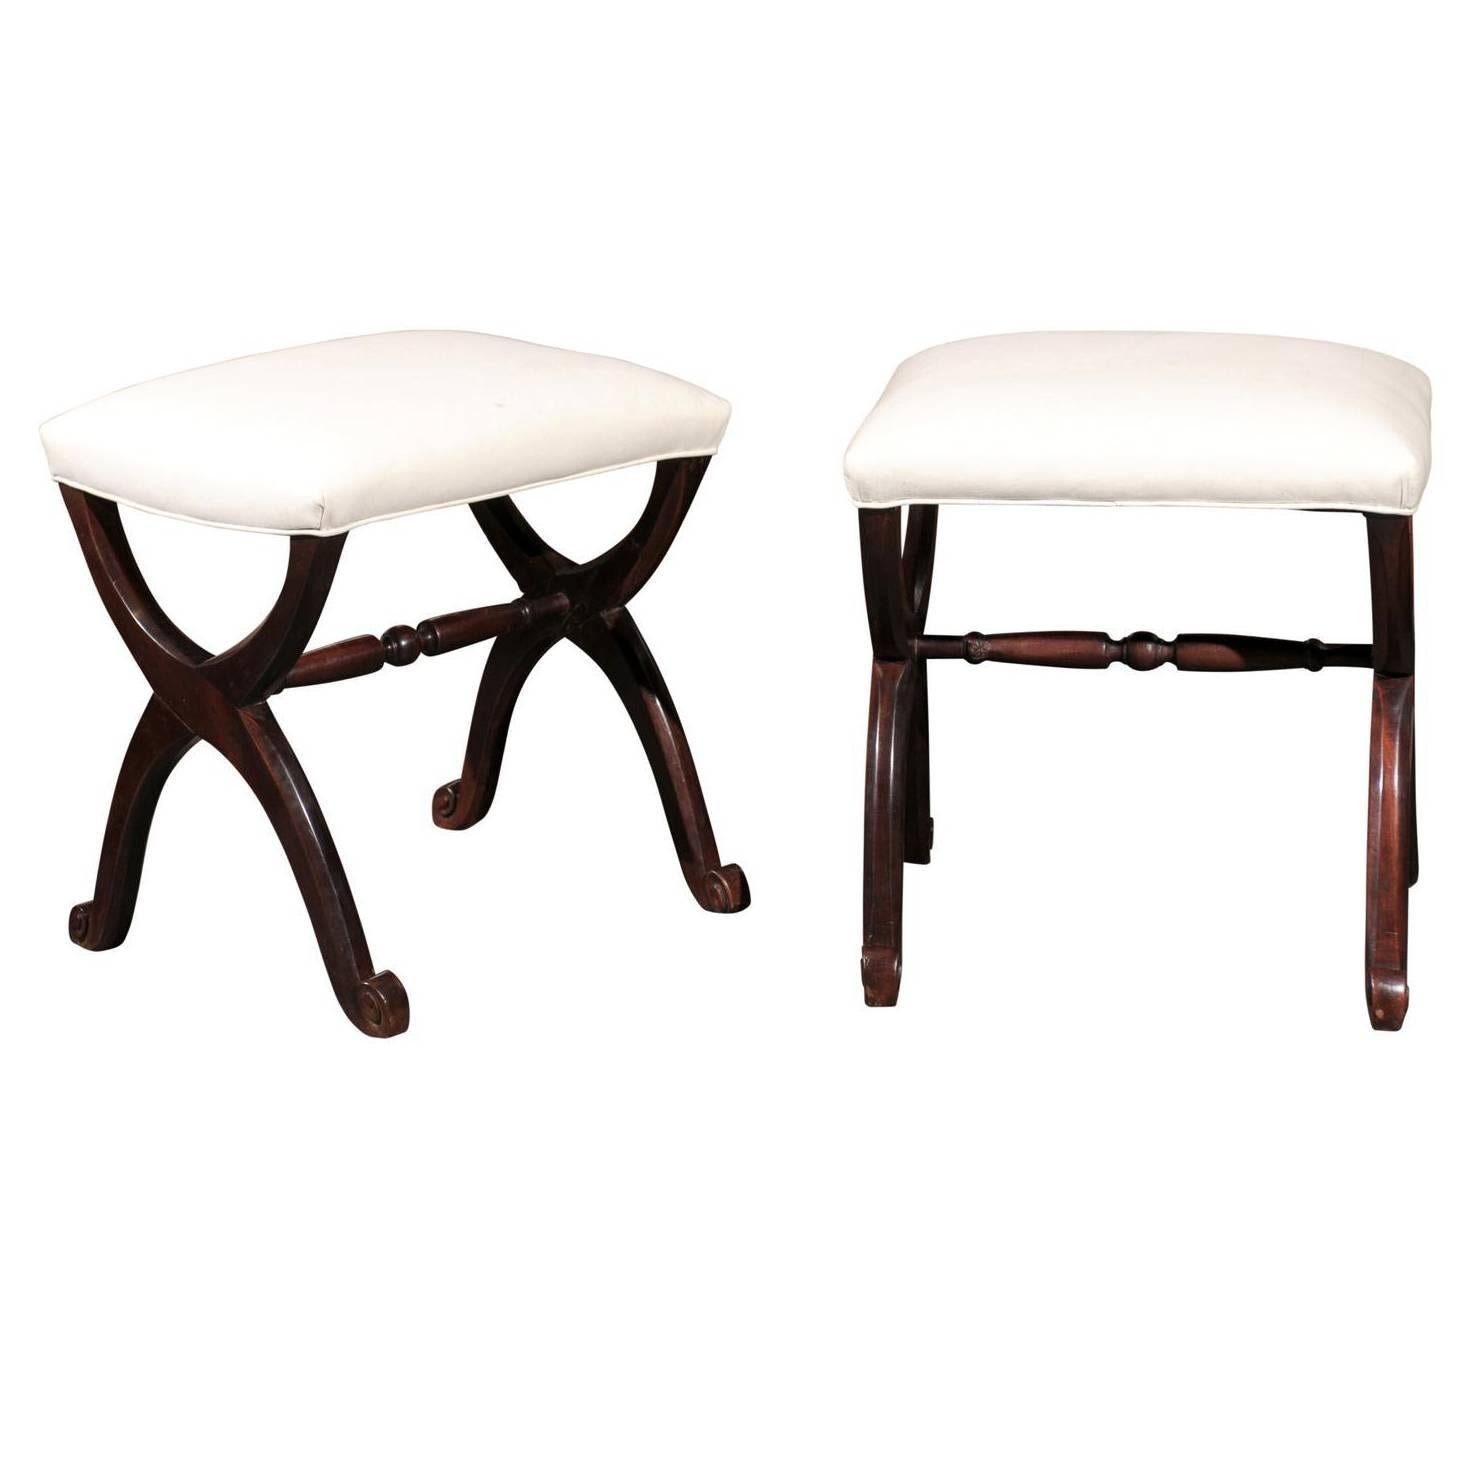 Pair of 1880s French Dark Mahogany X-Form Stools with New Muslin Upholstery